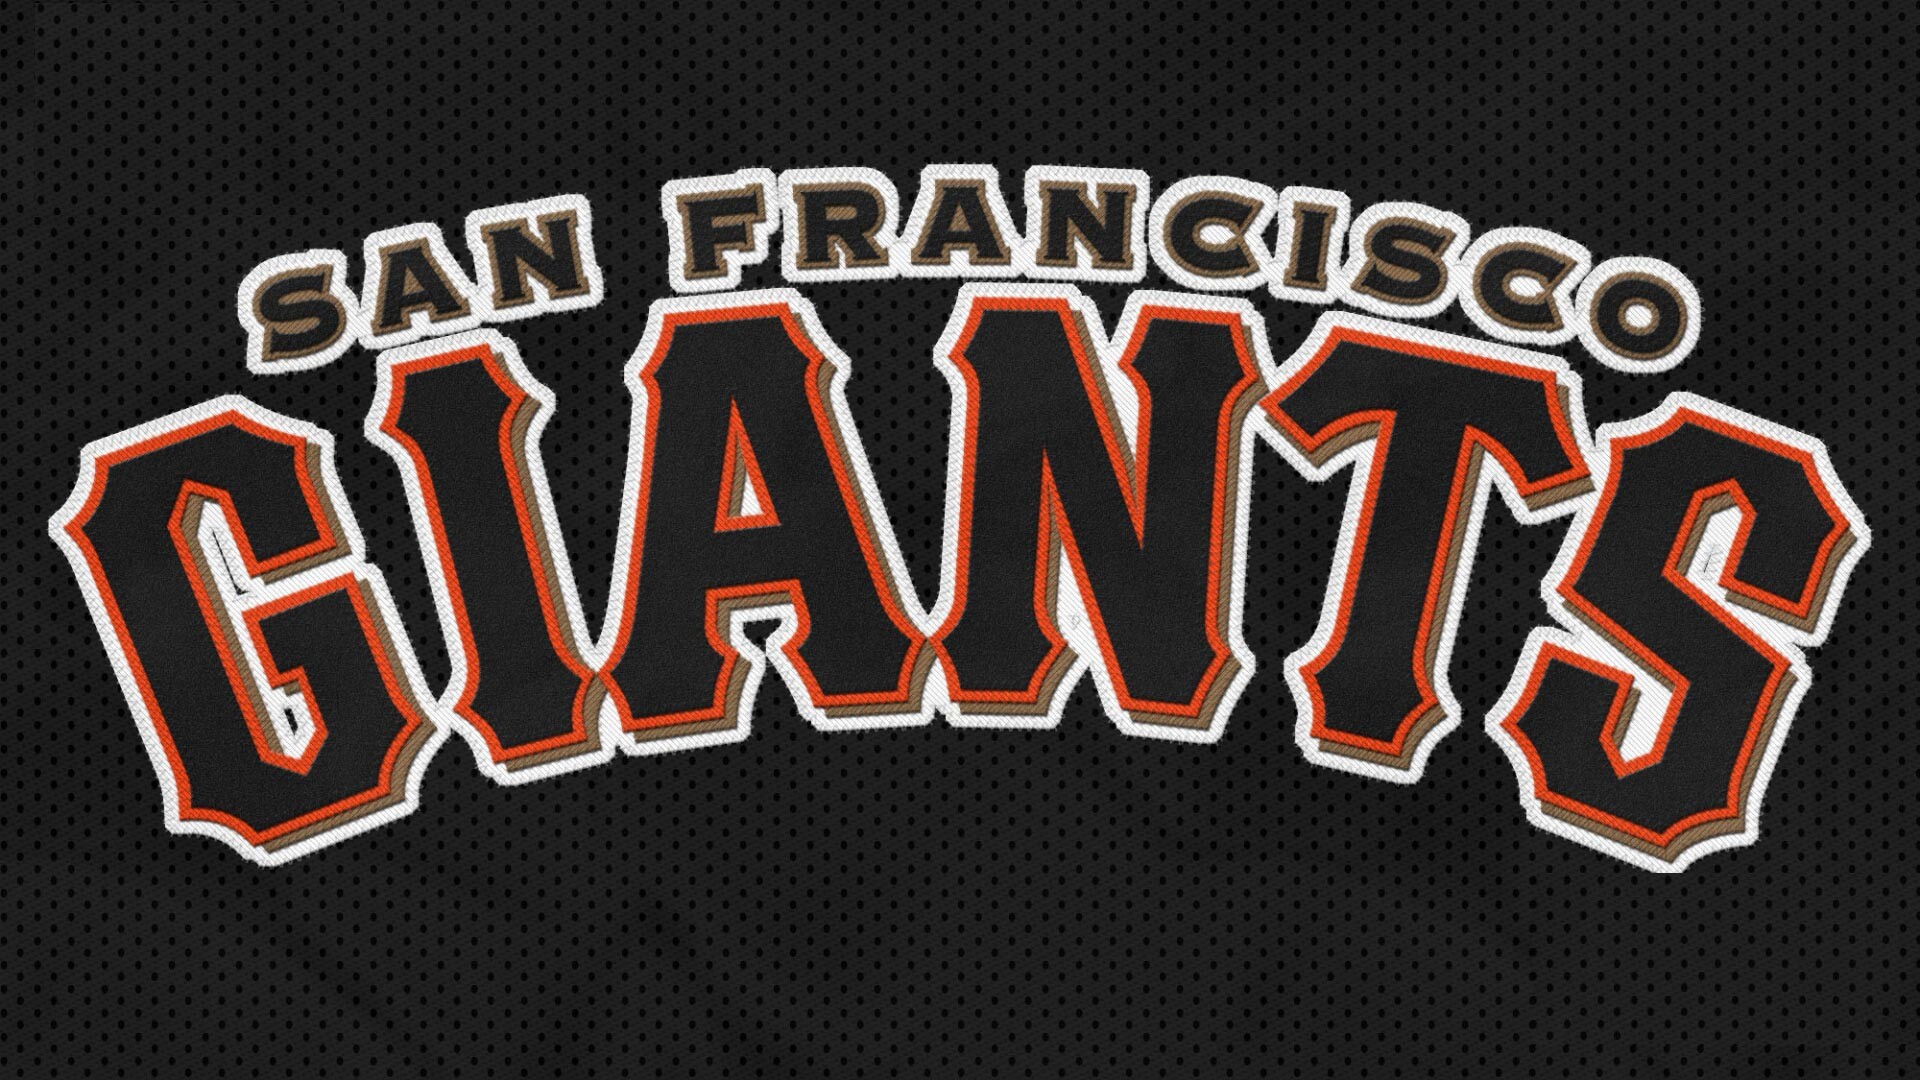 San Francisco Giants: The team played at Candlestick Park until 1999, MLB. 1920x1080 Full HD Wallpaper.